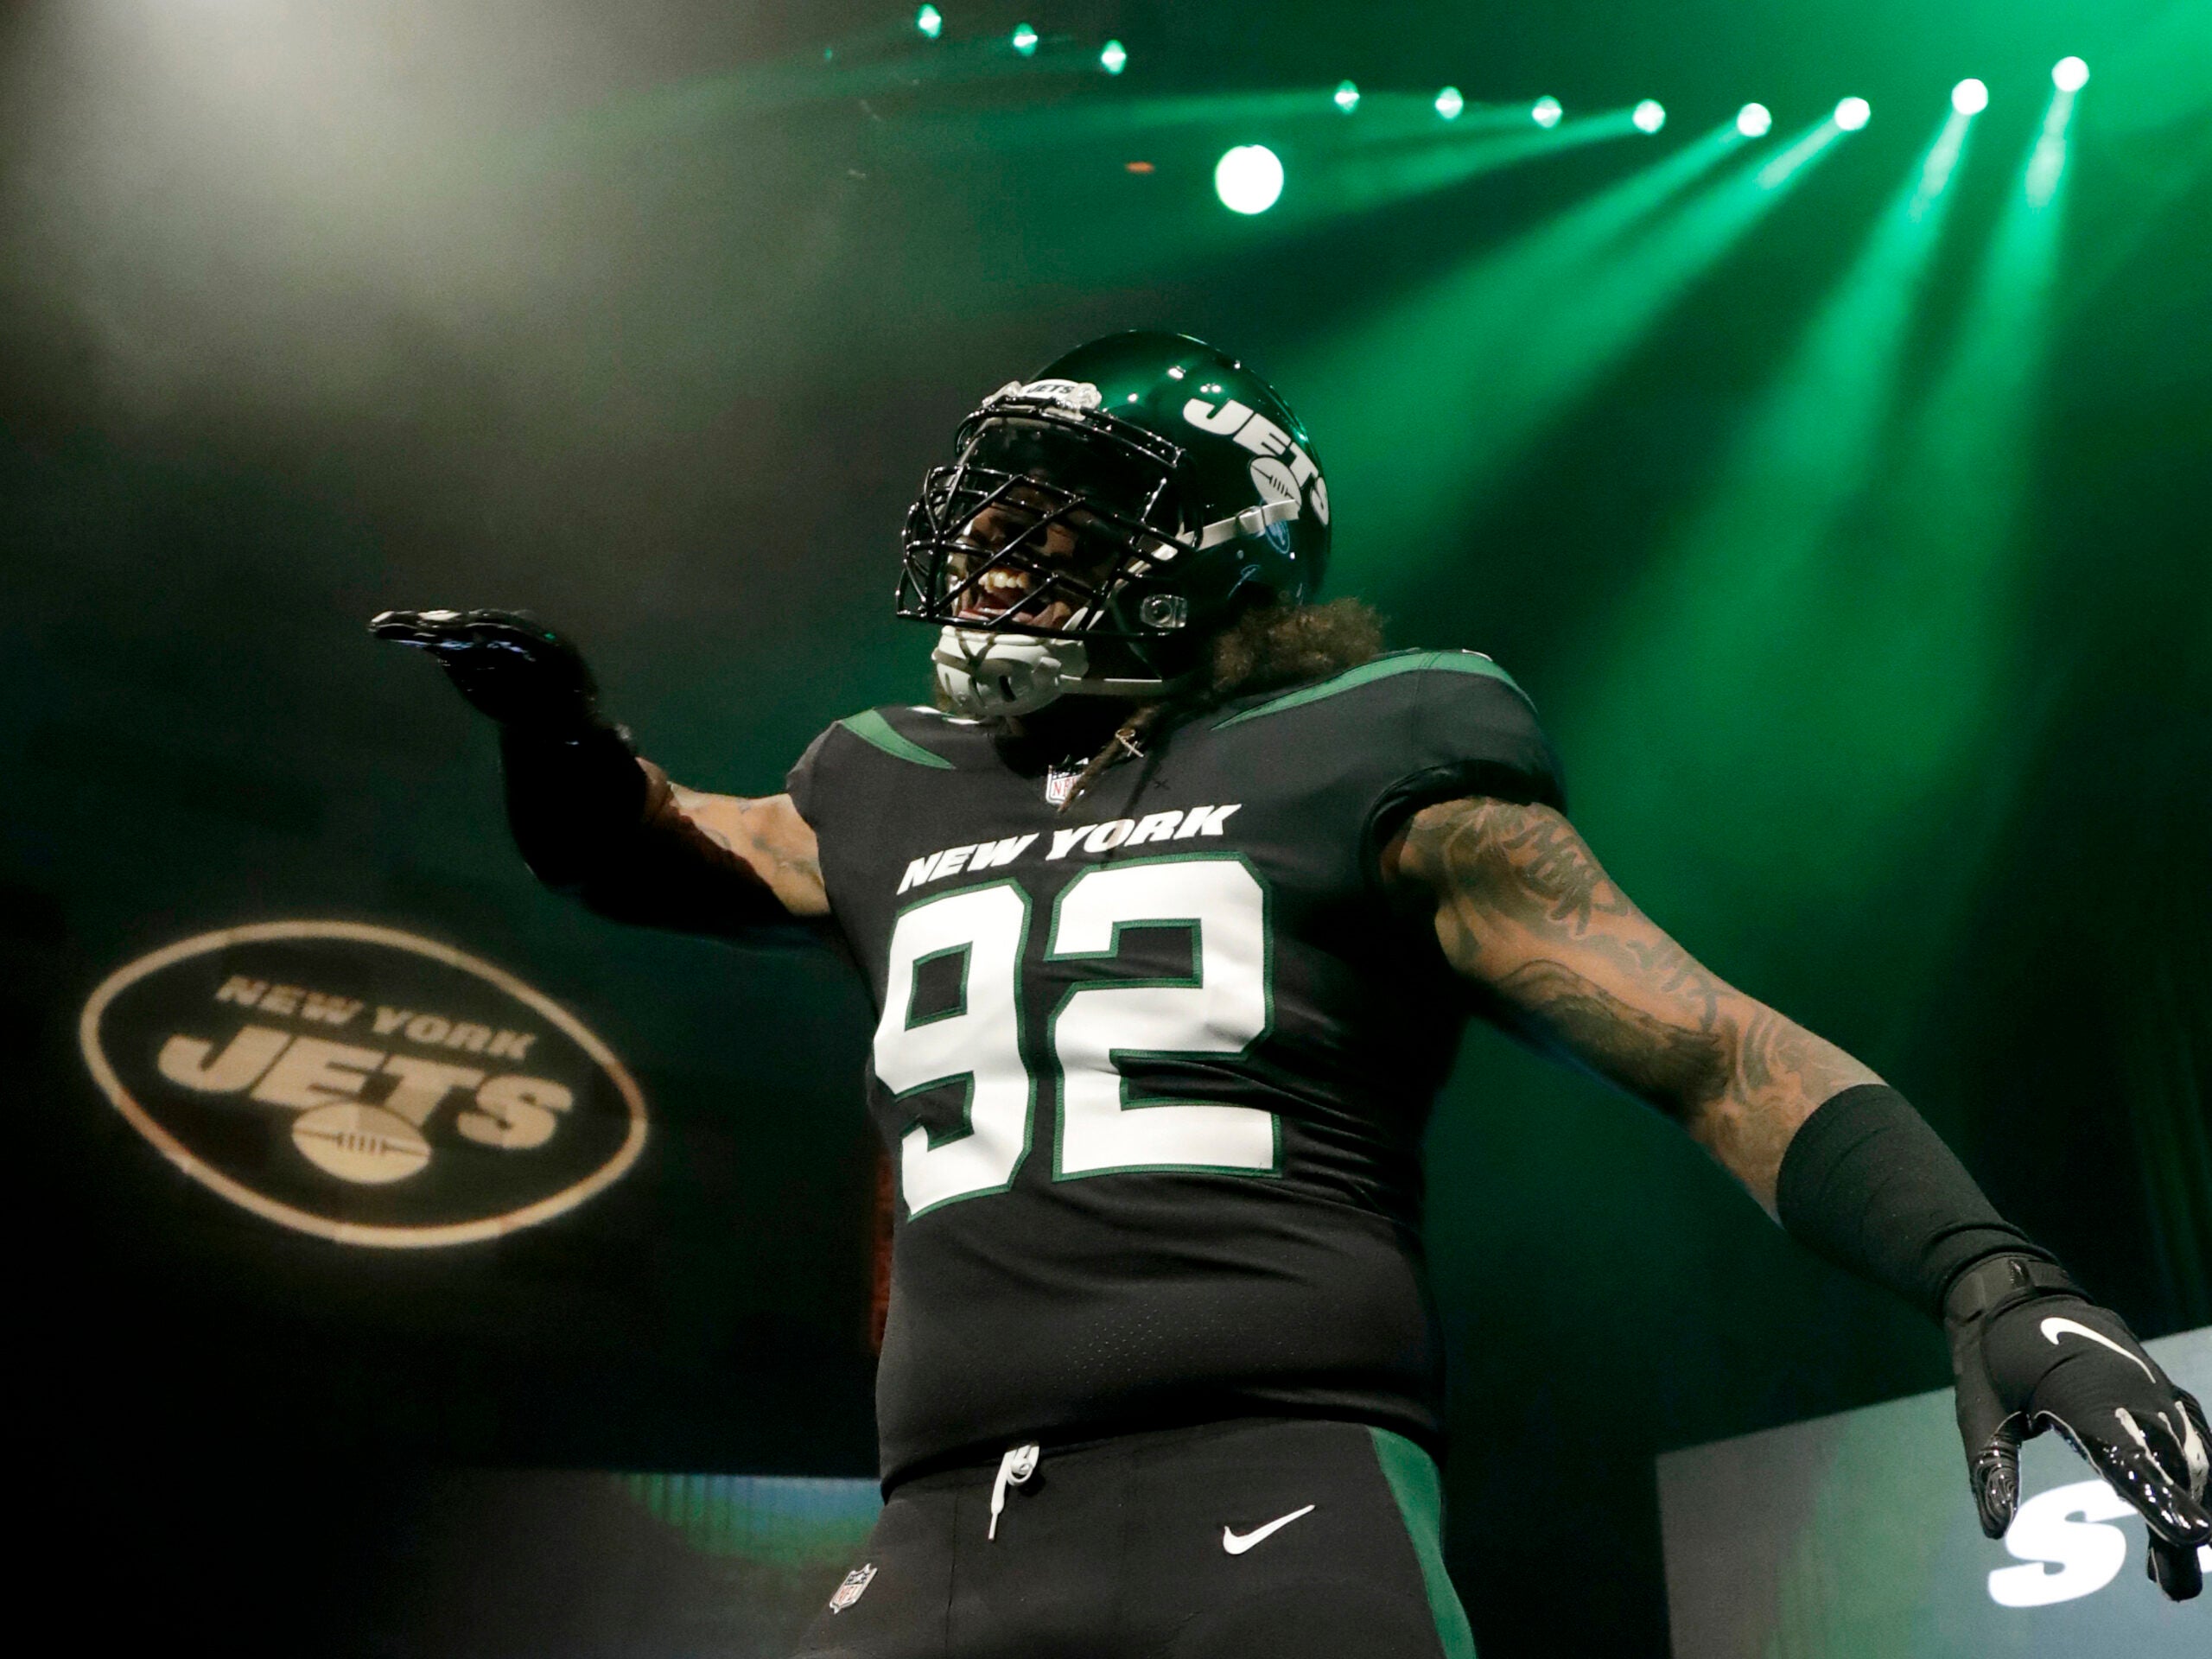 The Jets unveiled new uniforms to the expected internet roasting